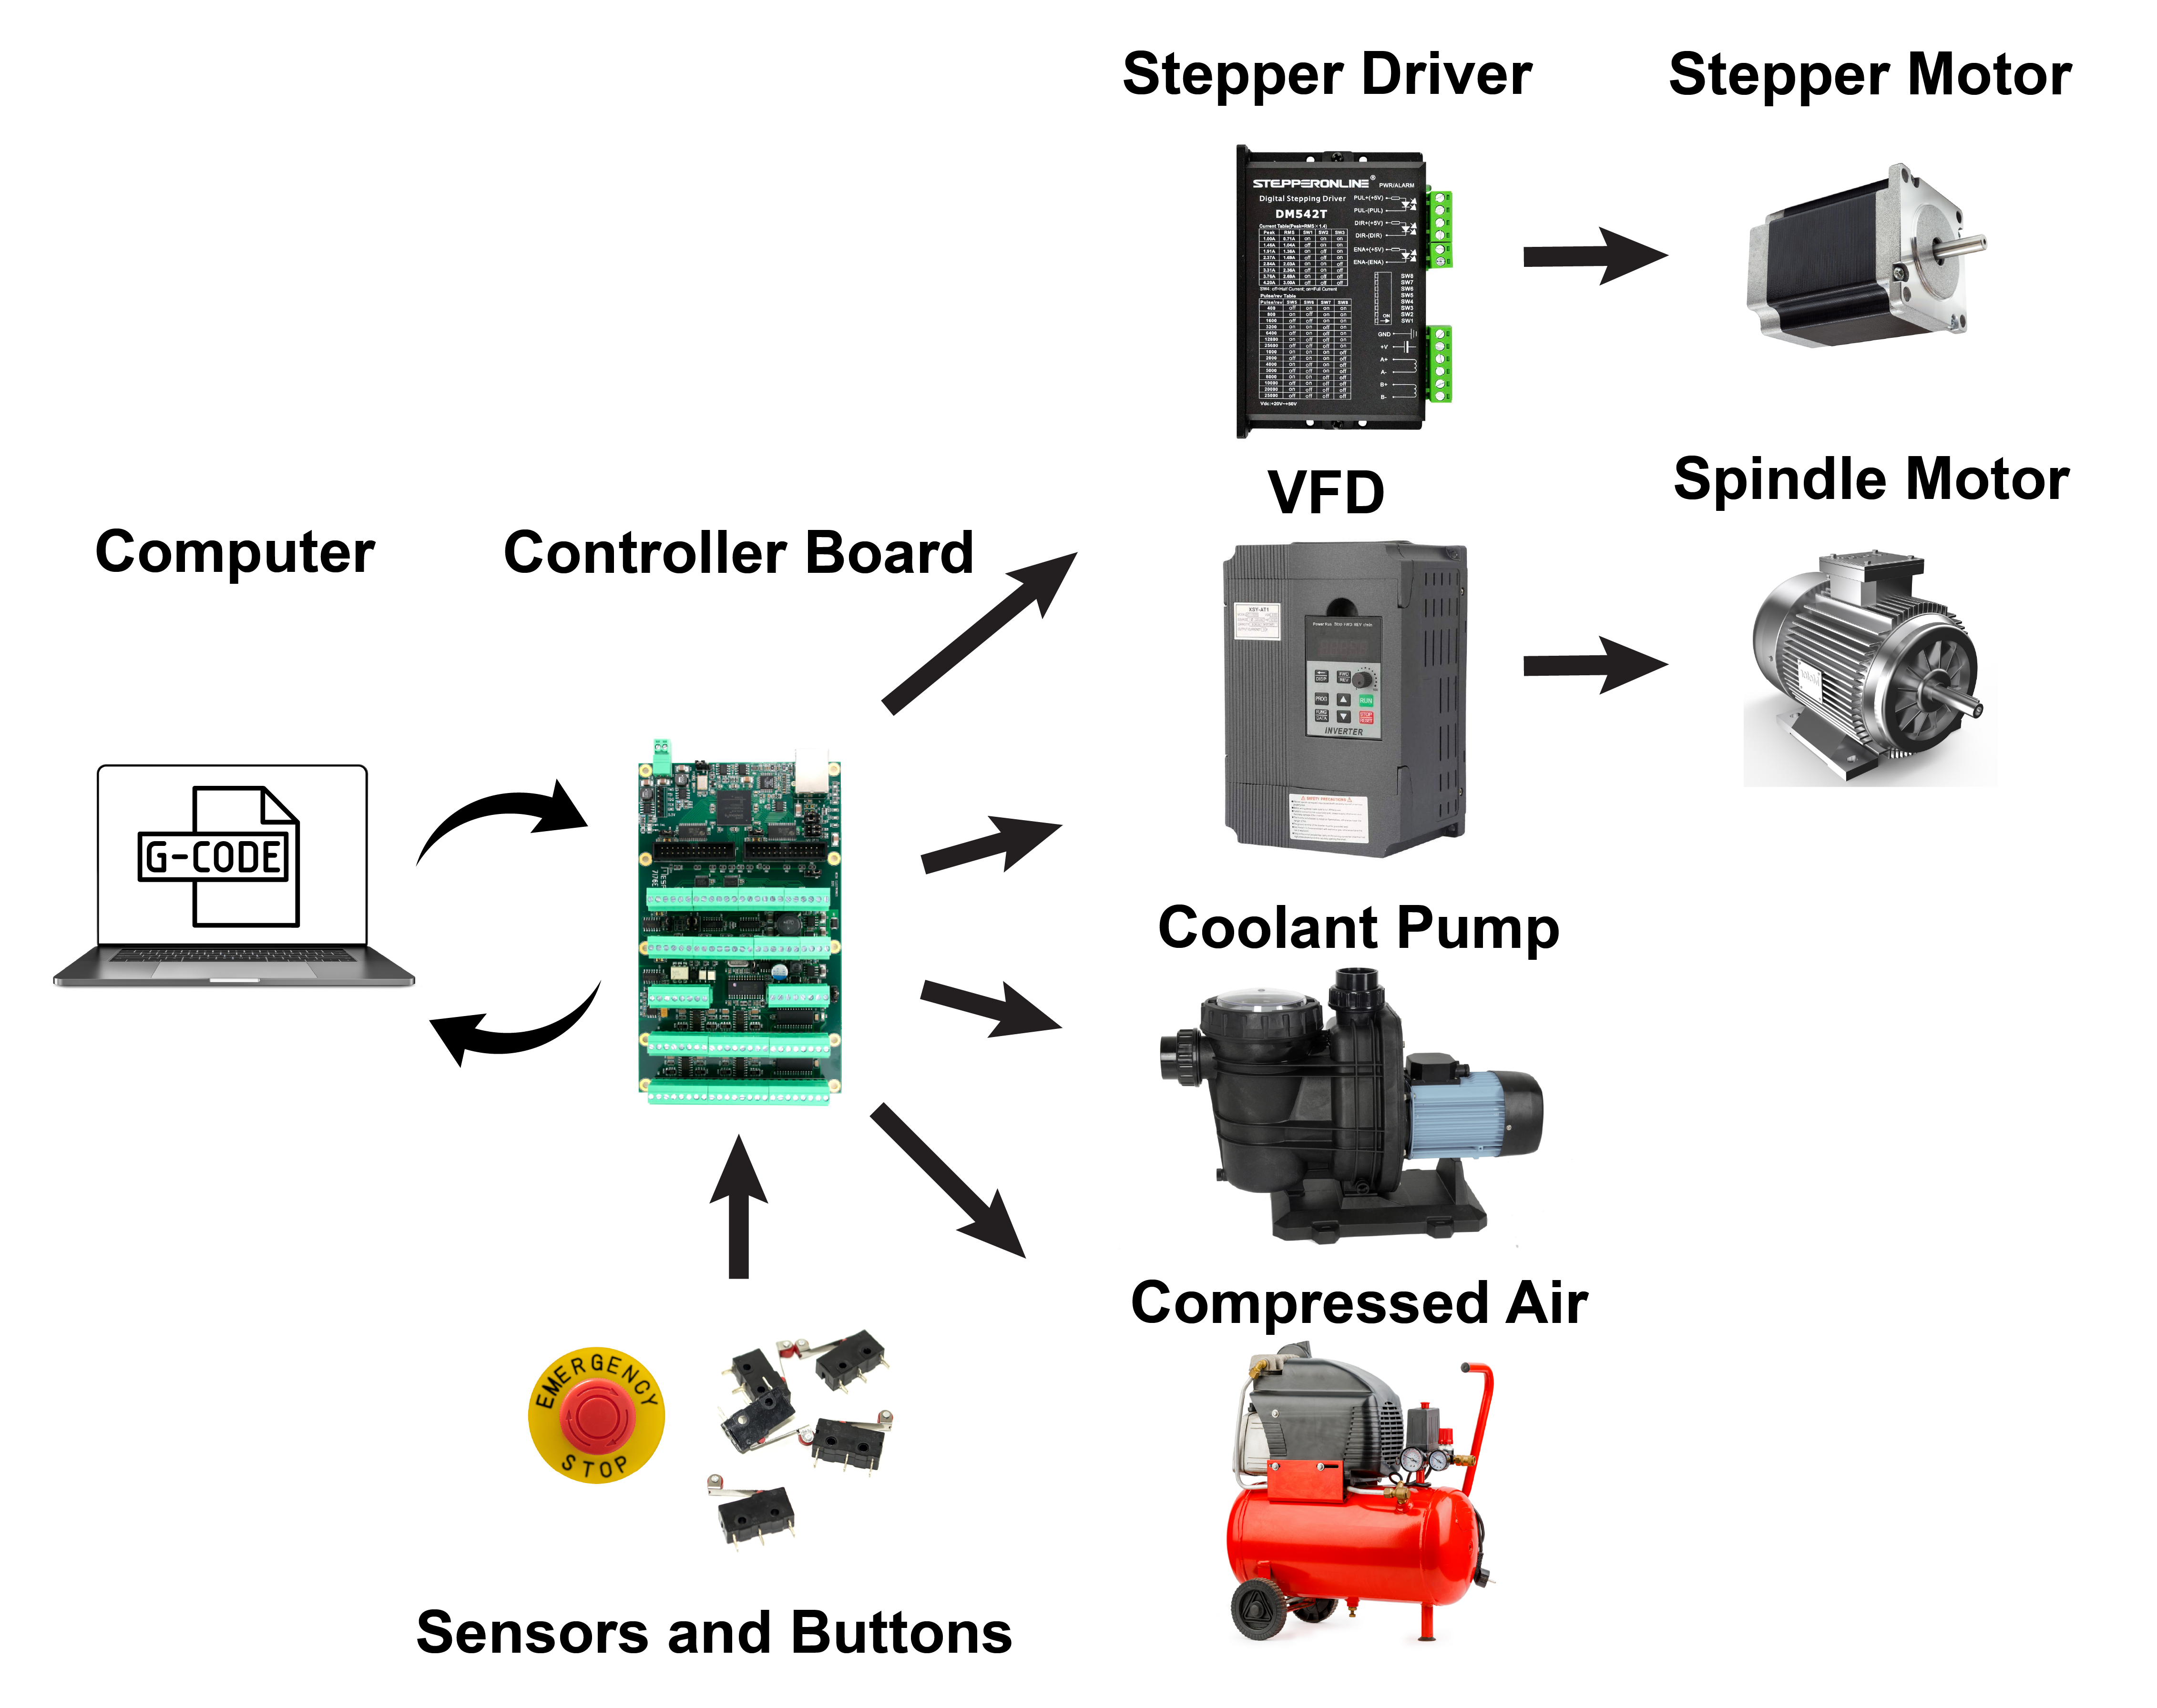 Examples of electrical components that can be interfaced with a CNC controller board.